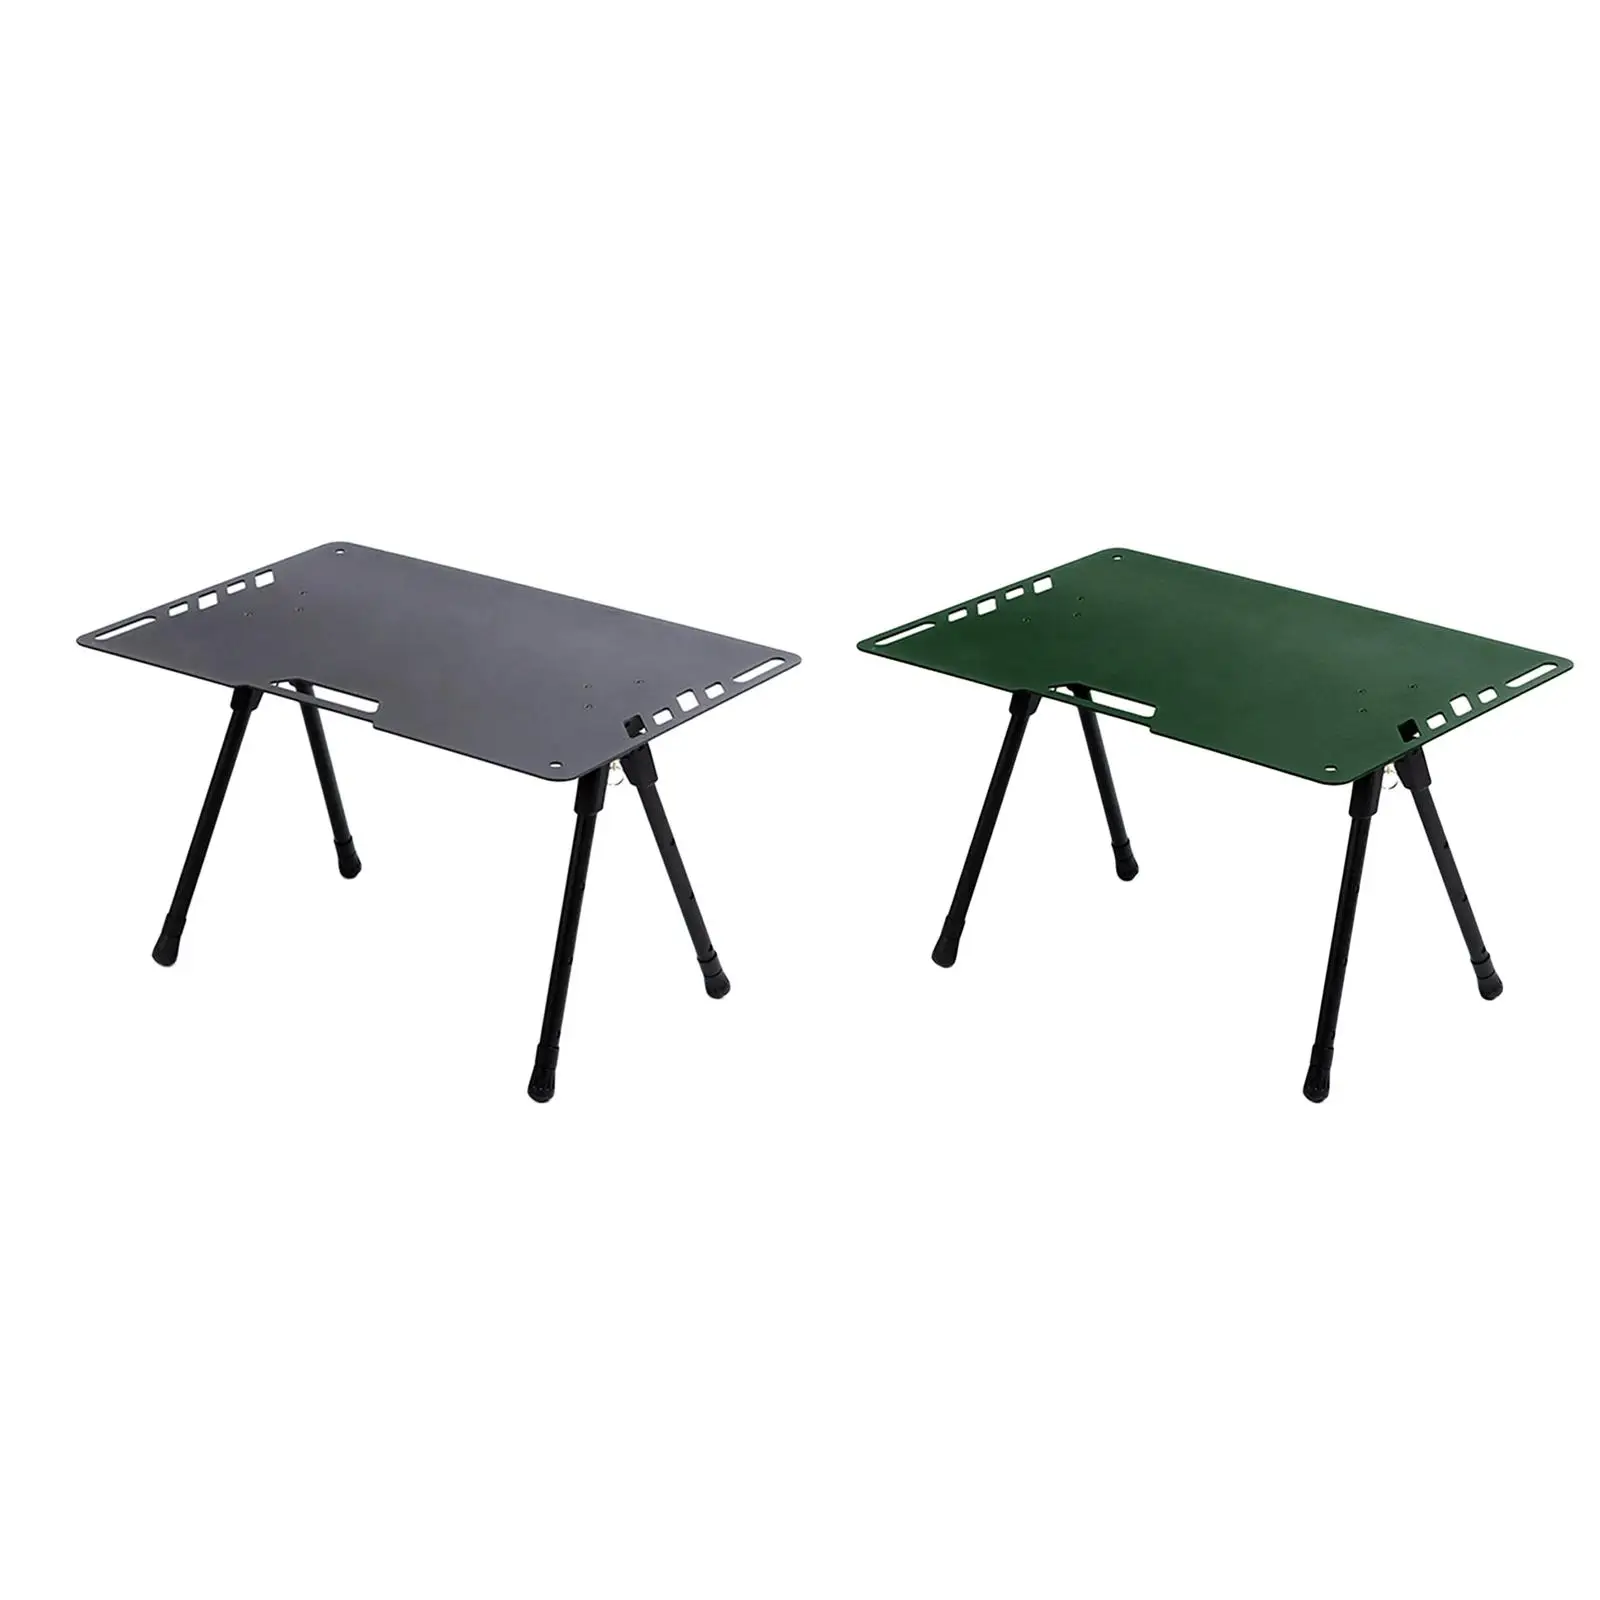 Portable Beach Table with Handle Camp Table Camping Folding Tables Side Table for Garden Picnic Deck Lantern Lamp Holder BBQ